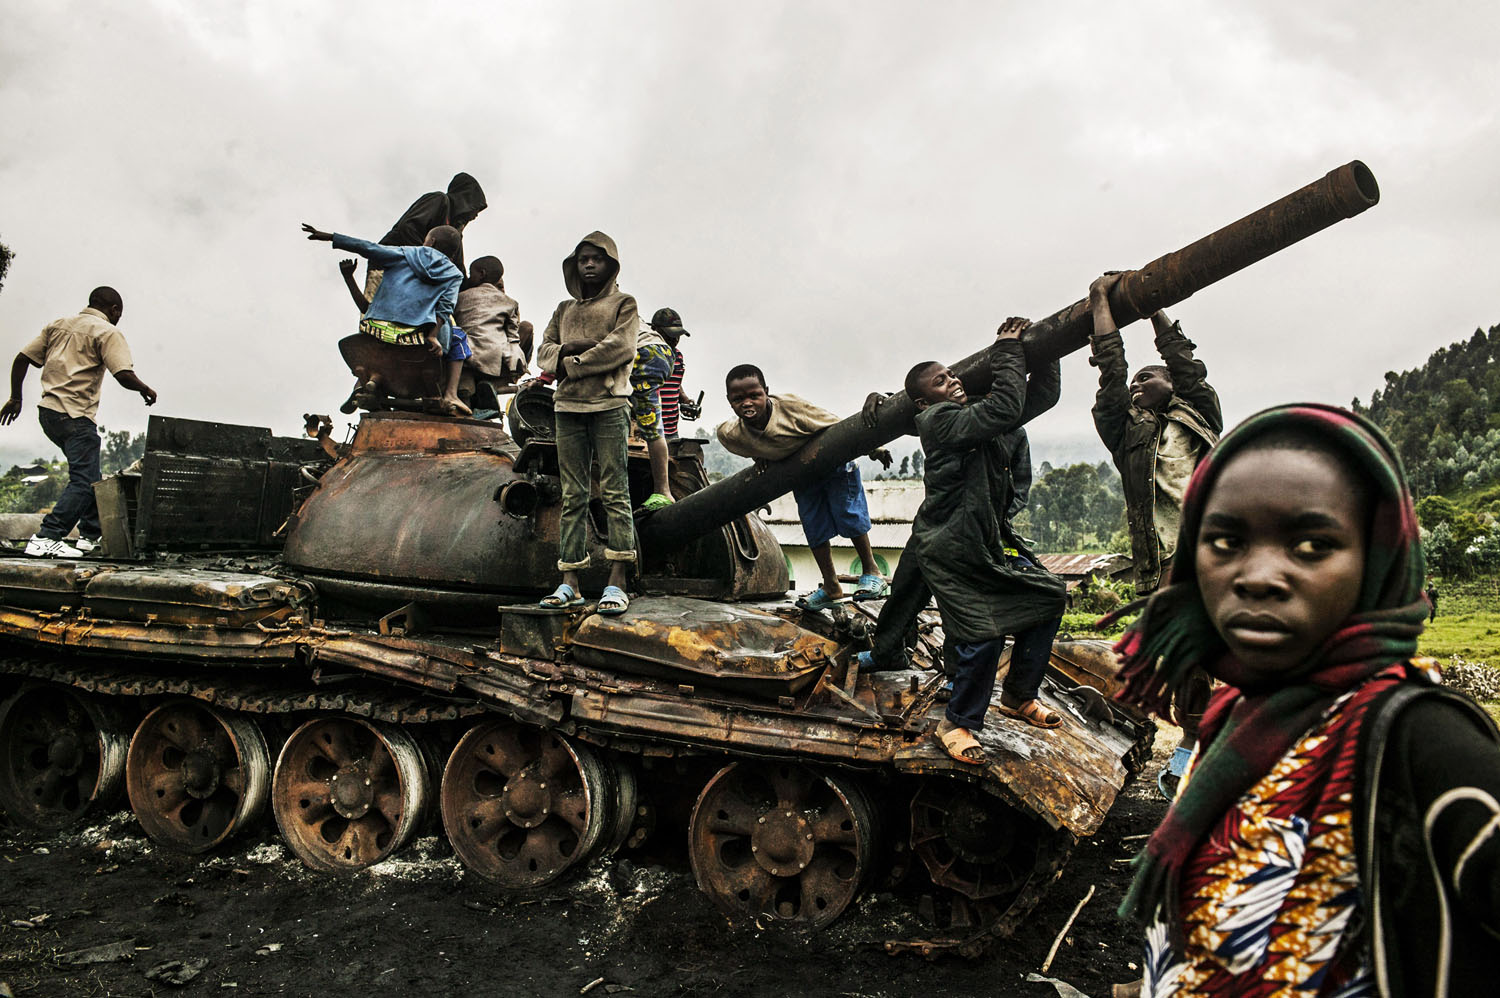  Congolese children play on a destroyed M-23 tank near Kibumba, north of Goma on Tuesday. Kibumba was the site of heavy fighting between the Congolese army and M-23 rebels on Sunday. 